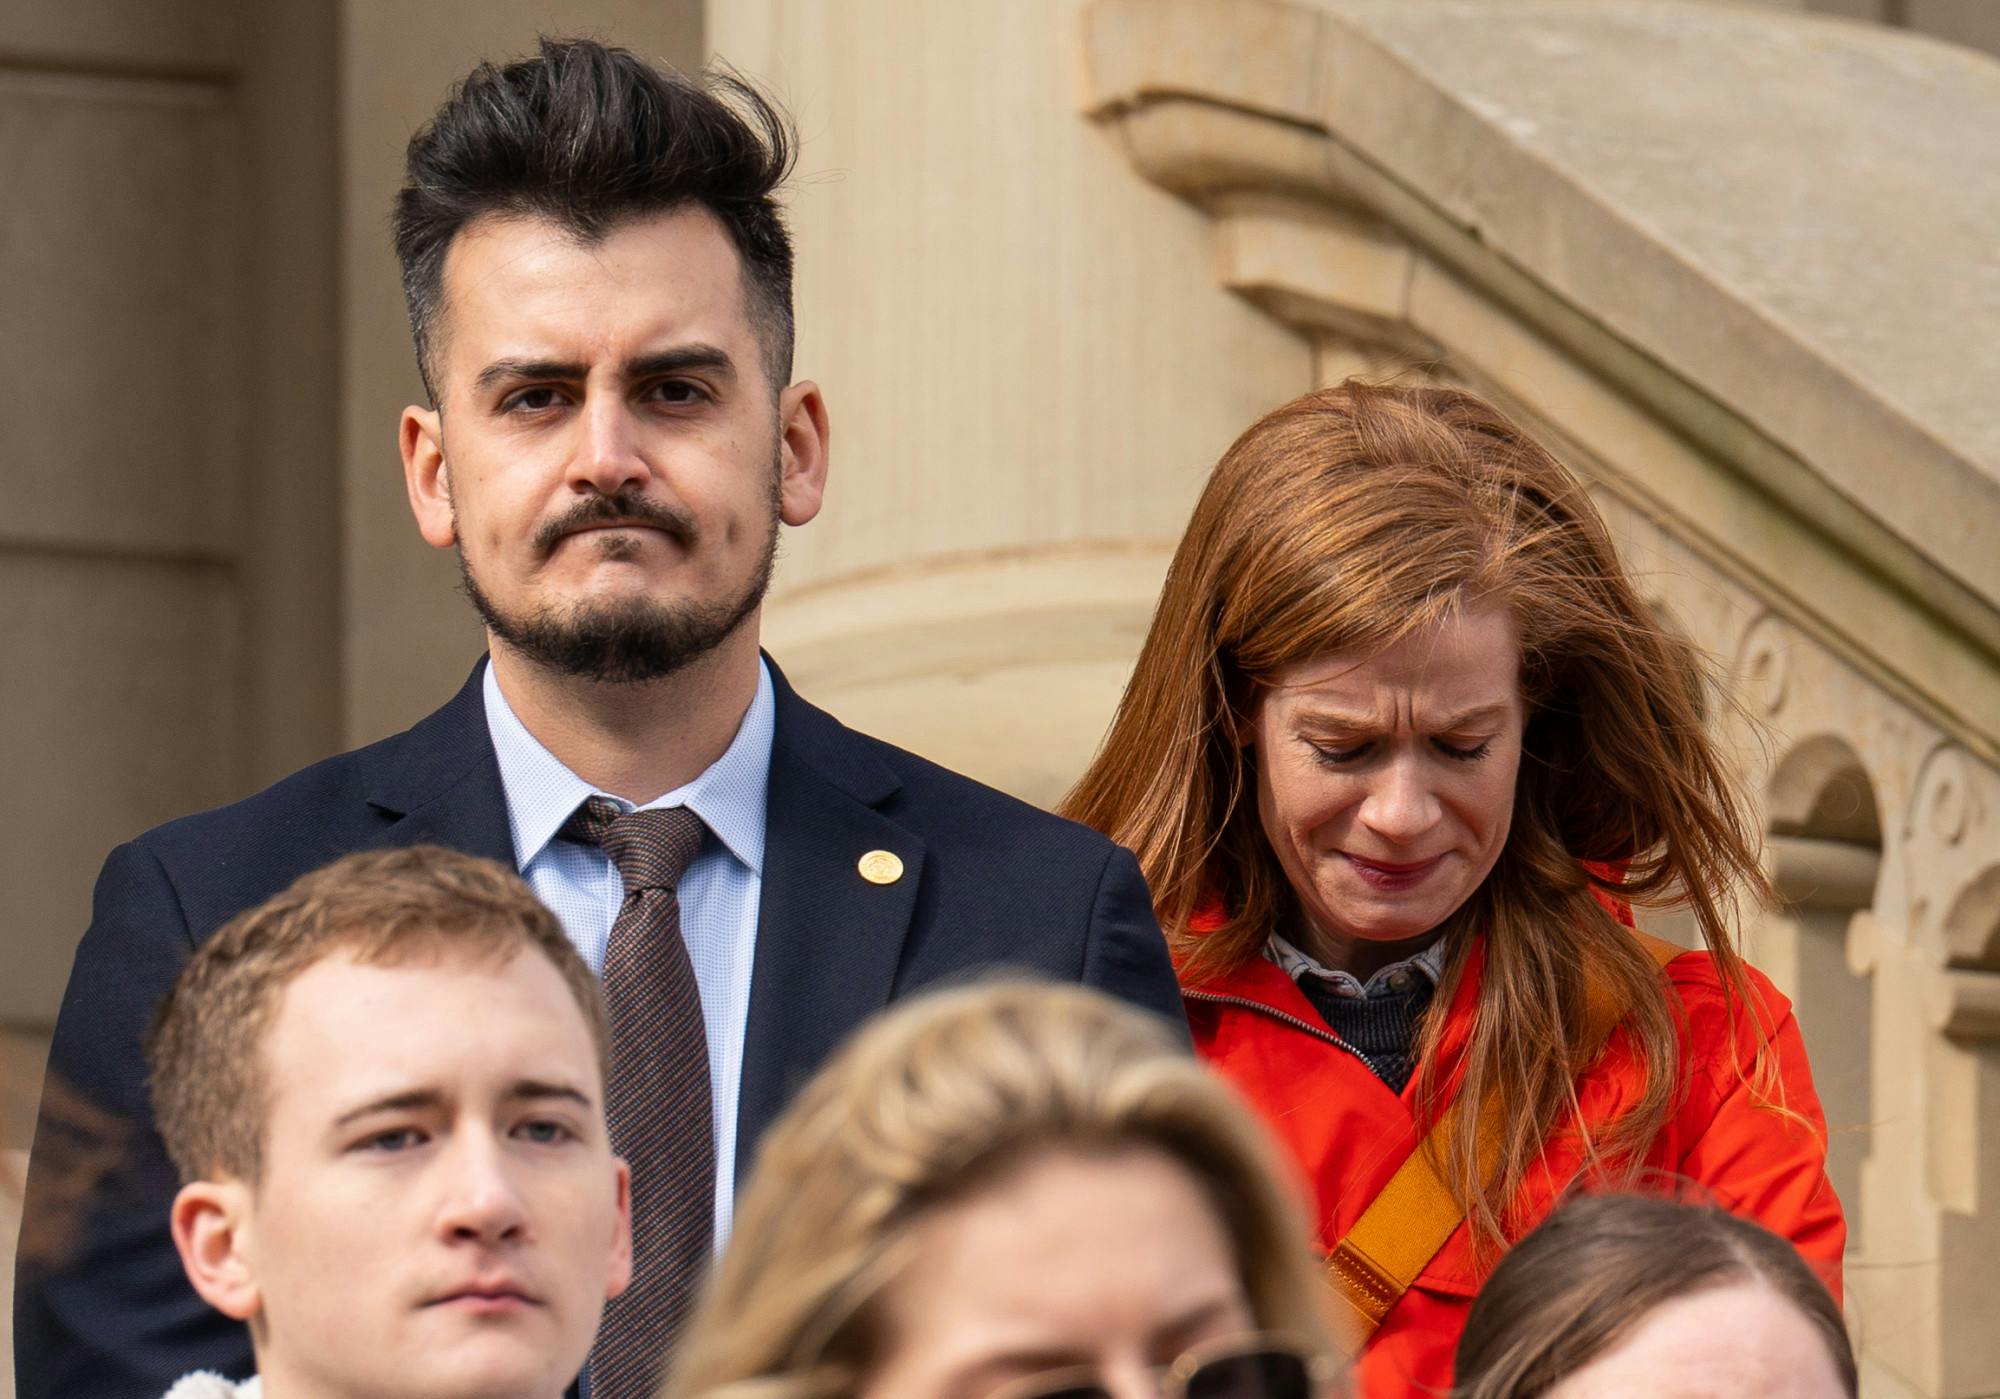 <p>Michigan Senate members Darrin Camilleri and Mallory McMorrow listen on as students speak out against gun violence at the Michigan State Capitol on Feb. 15, 2023. "This should not be a shared American experience," McMorrow said.</p>